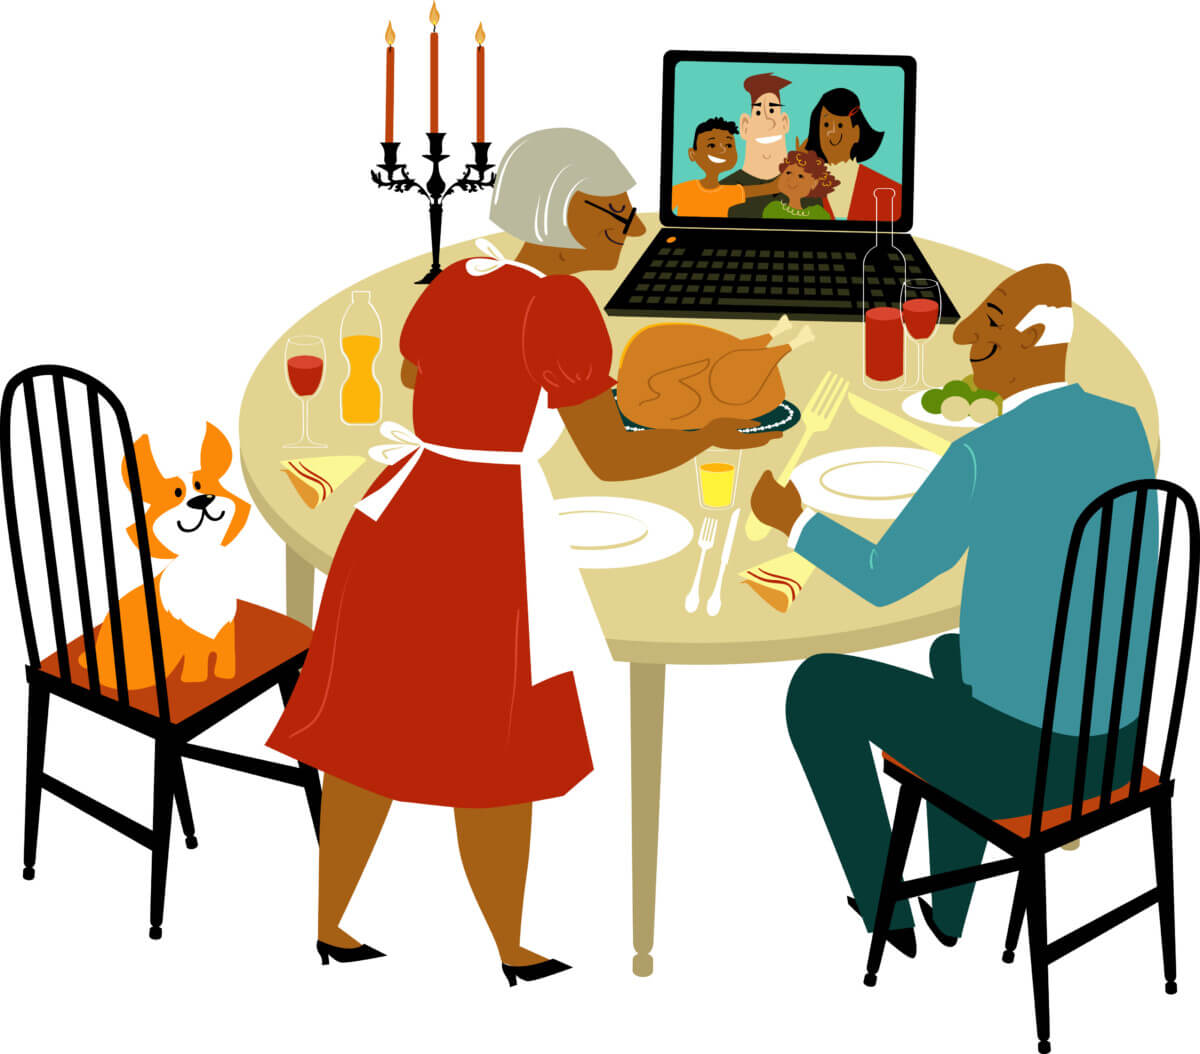 Elderly black couple having a holiday turkey dinner with their children and grandchildren joying them via video chat on a computer, EPS 8 vector illustration